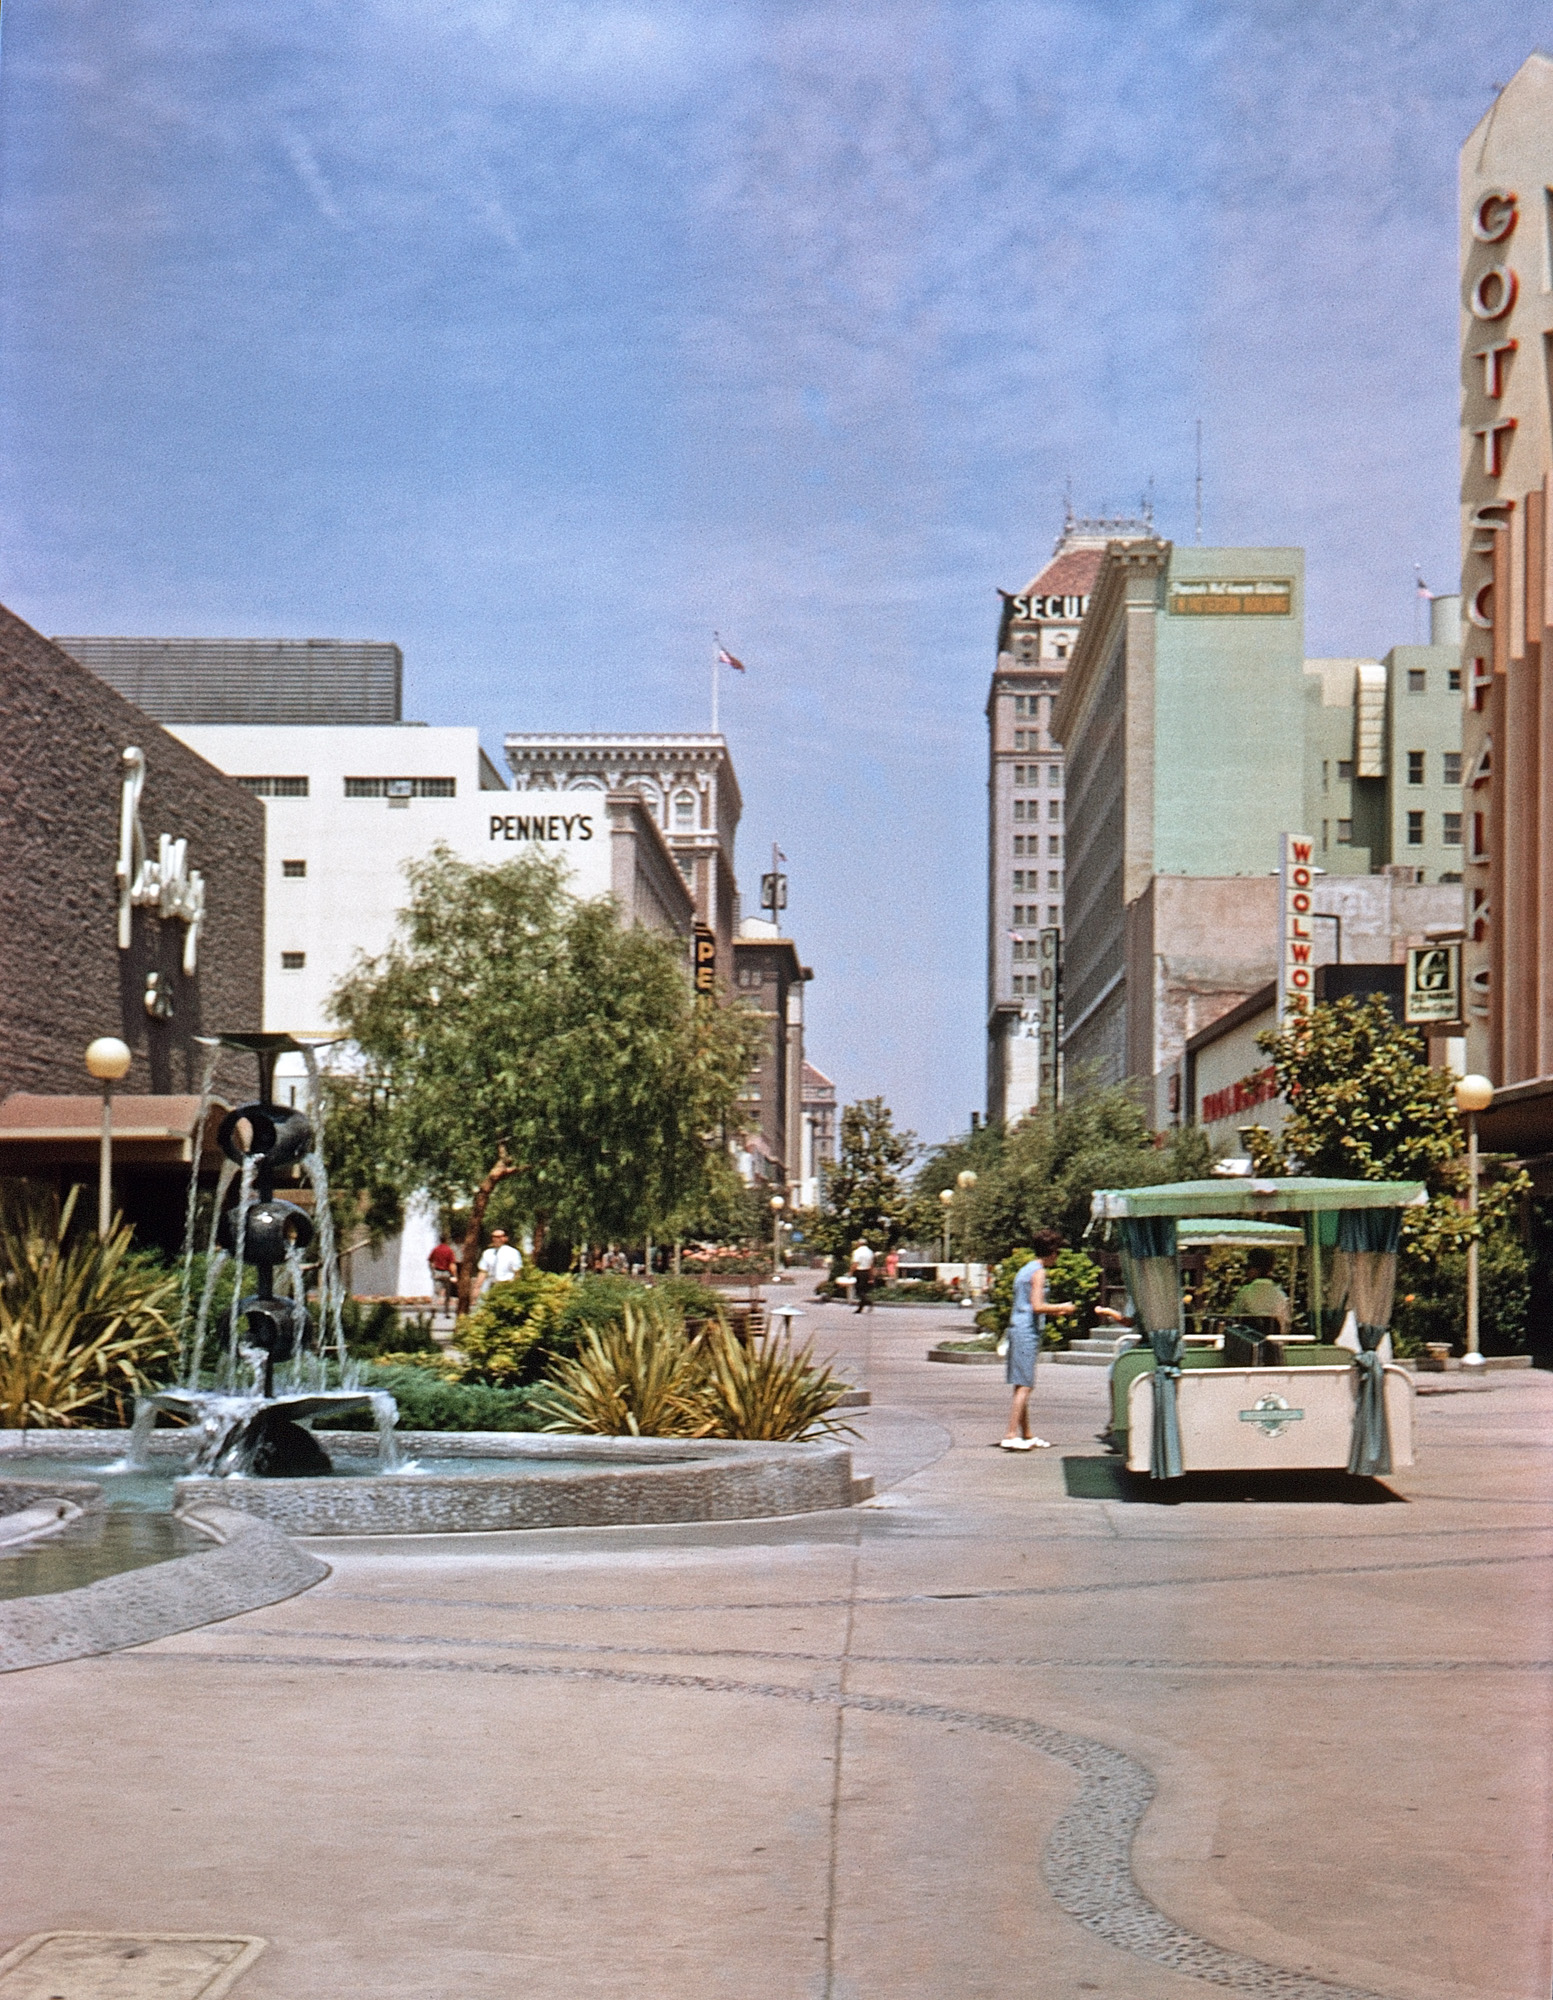 Our 1967 vacation first took us to Sequoia and Kings Canyon National Parks; then on the way to Yosemite we went through Fresno, where I took this Kodachrome slide of the Fulton Mall three years after its opening. Pedestrianizing Fulton Street, with designs by architect Victor Gruen and landscape architect Garrett Eckbo, was a major part of Fresno's urban renewal program of the 1960s. Ironically, now that the big chain stores seen in my slide are long gone, the city's plan to revitalize the area by re-introducing traffic onto Fulton Street is underway. View full size.